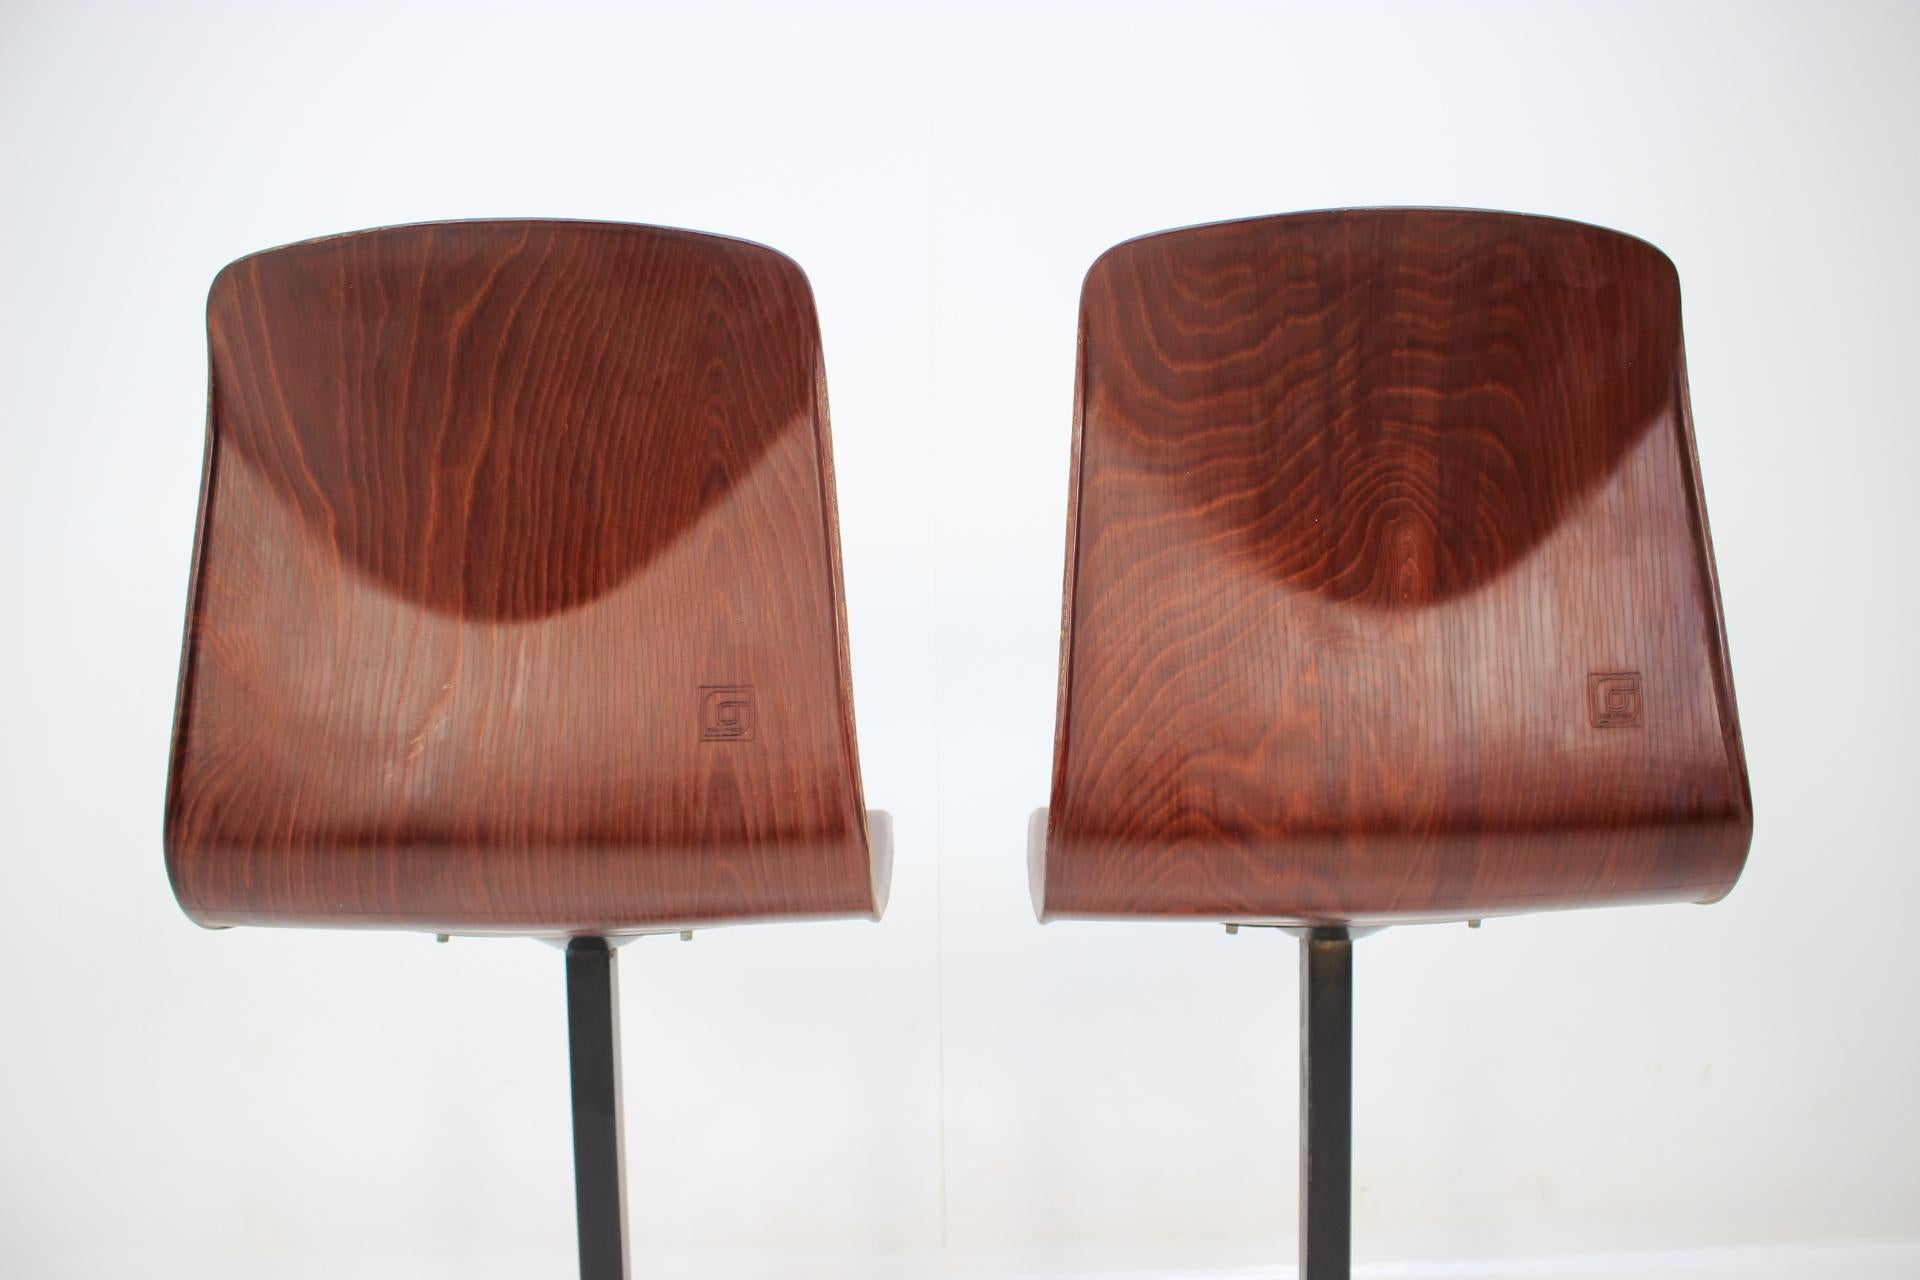 German Pair of Midcentury Industrial Style Chairs, Elmar Flötotto for Pagholz, 1970s For Sale